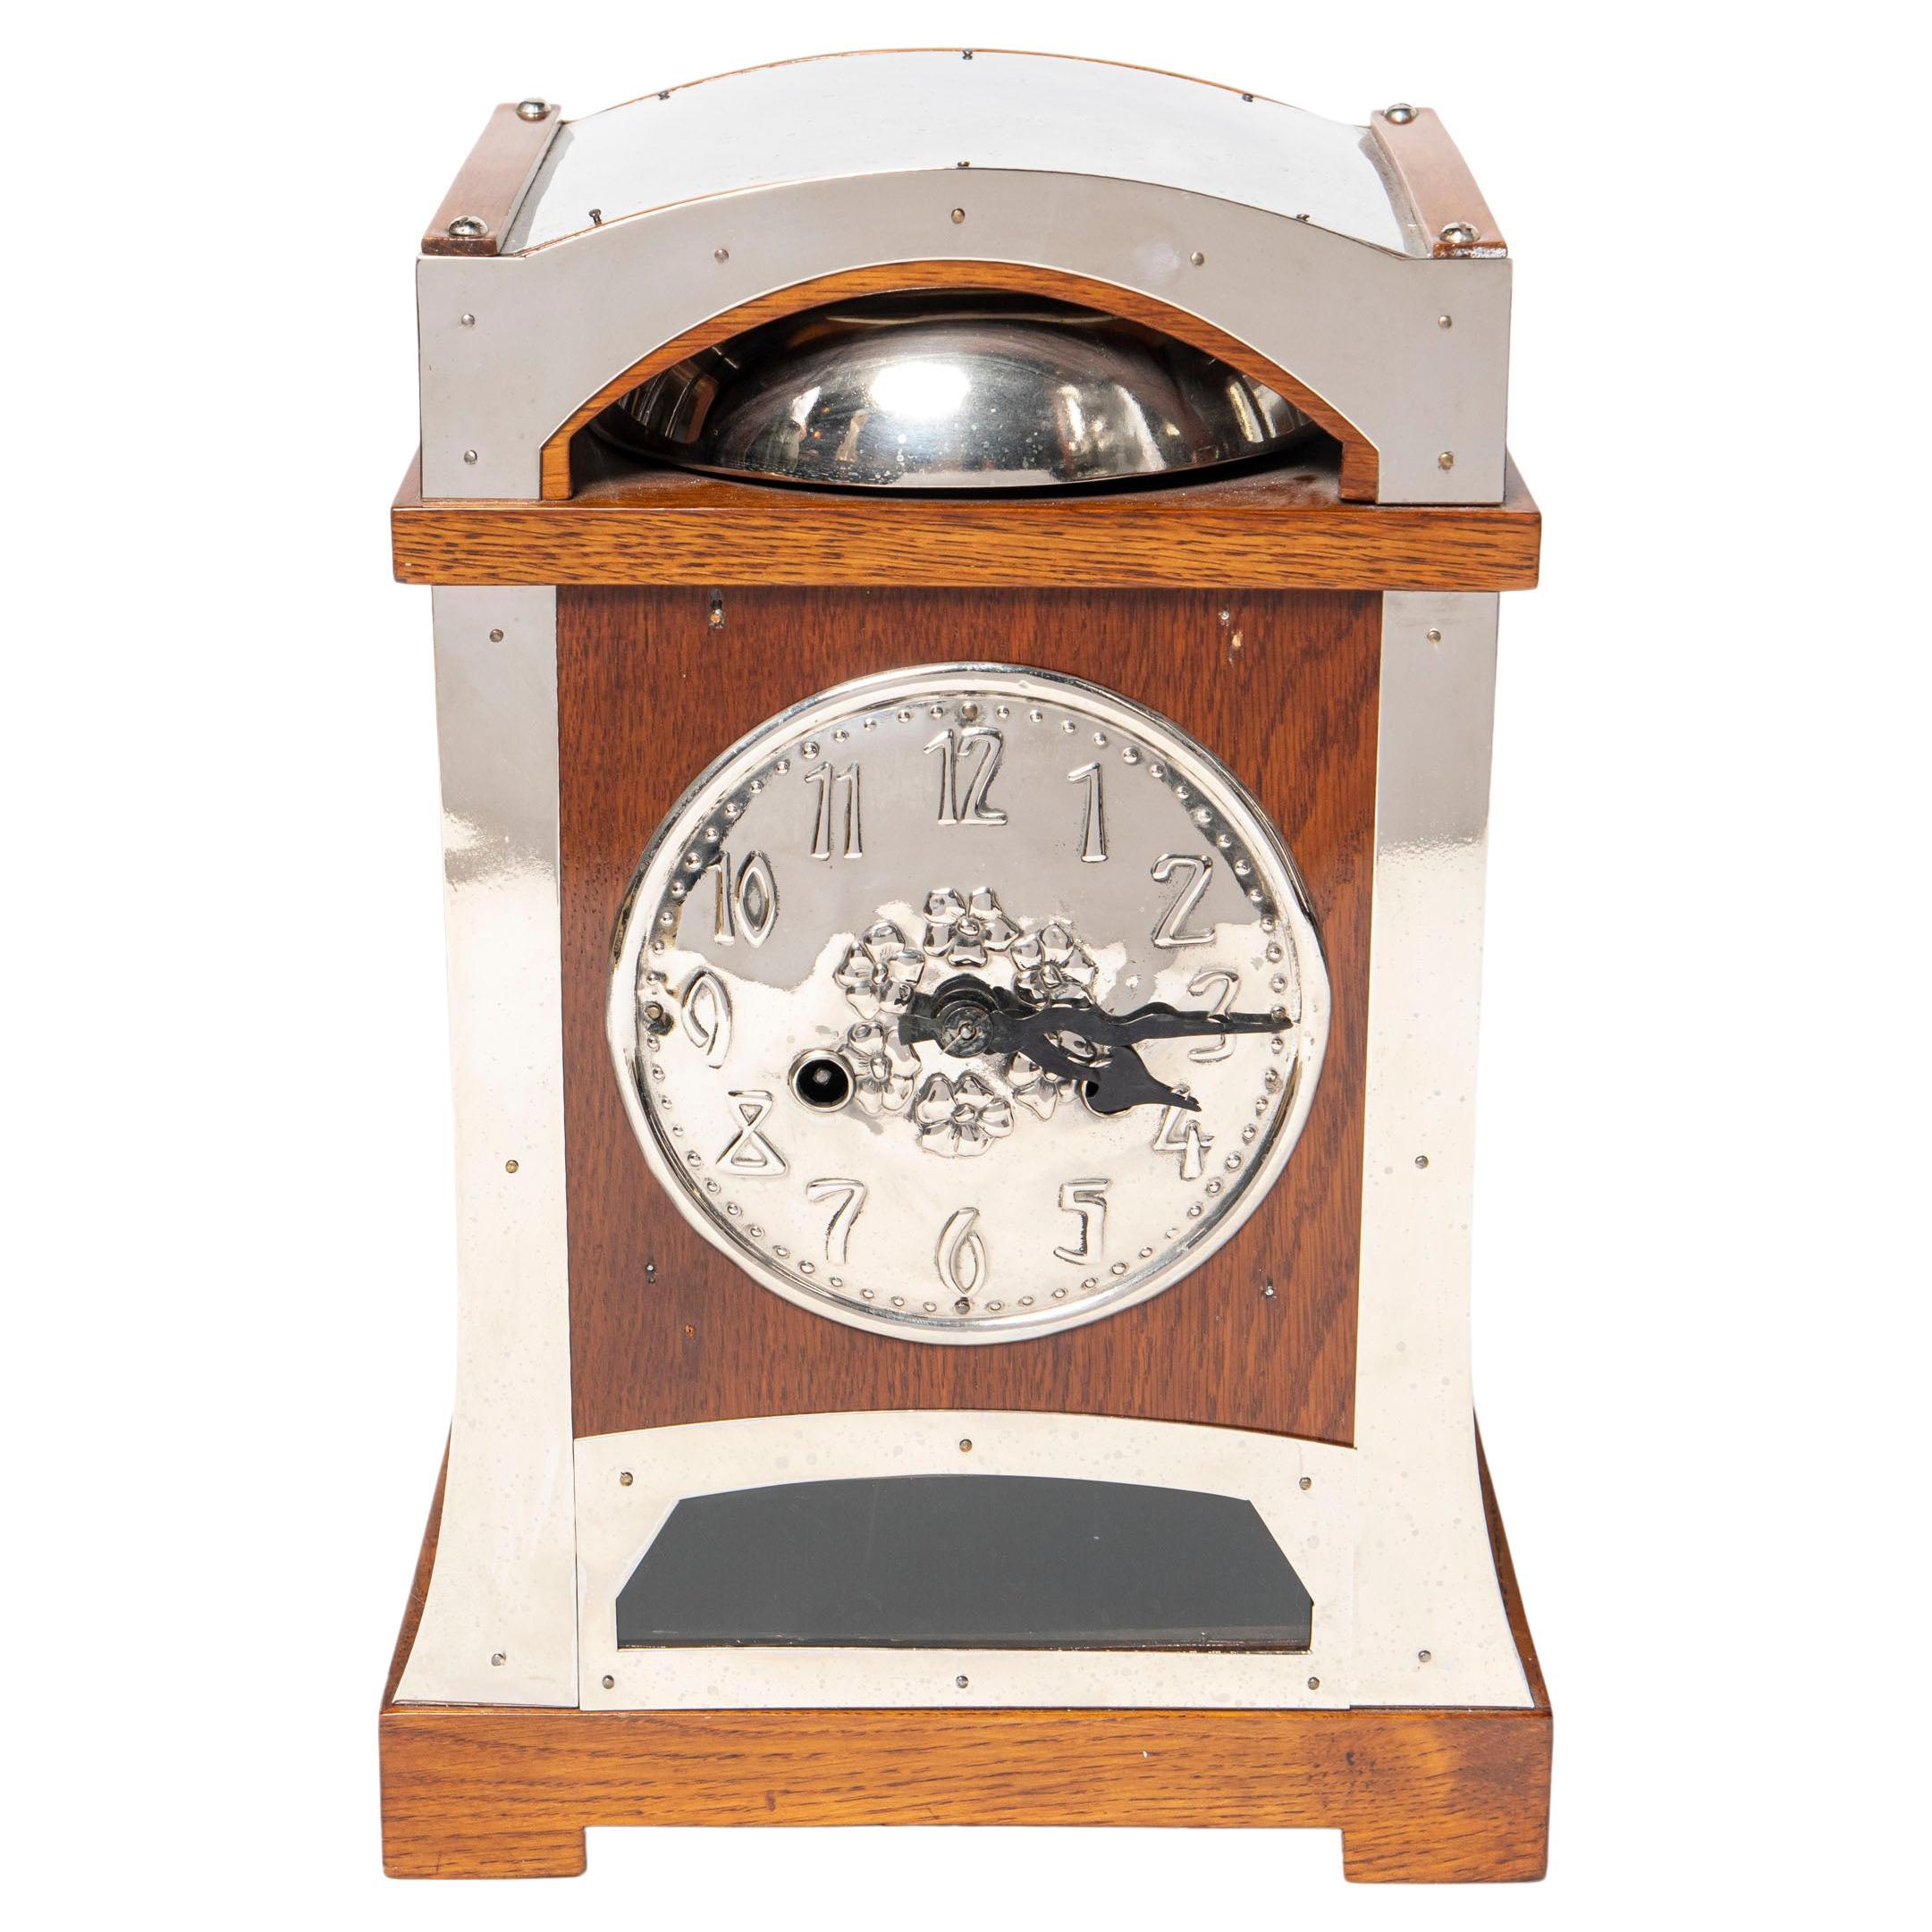 Wood and Chrome Table Clock, Art Nouveau Period, Spain, Early 20th Century